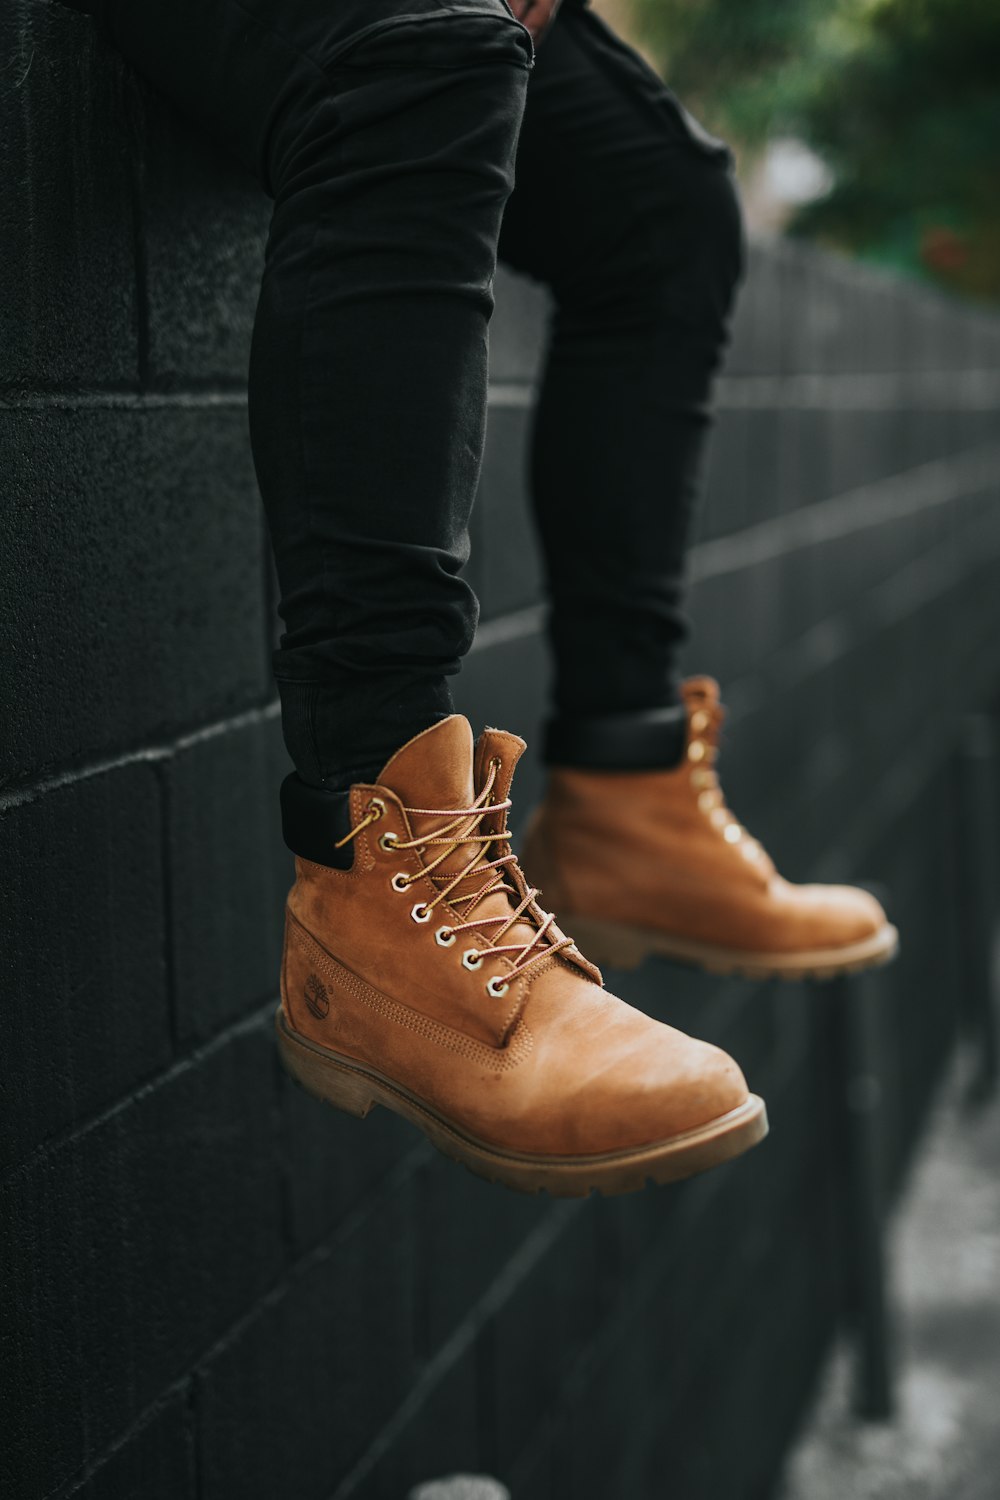 A pair of brown Timberland boots photo – Free Image on Unsplash